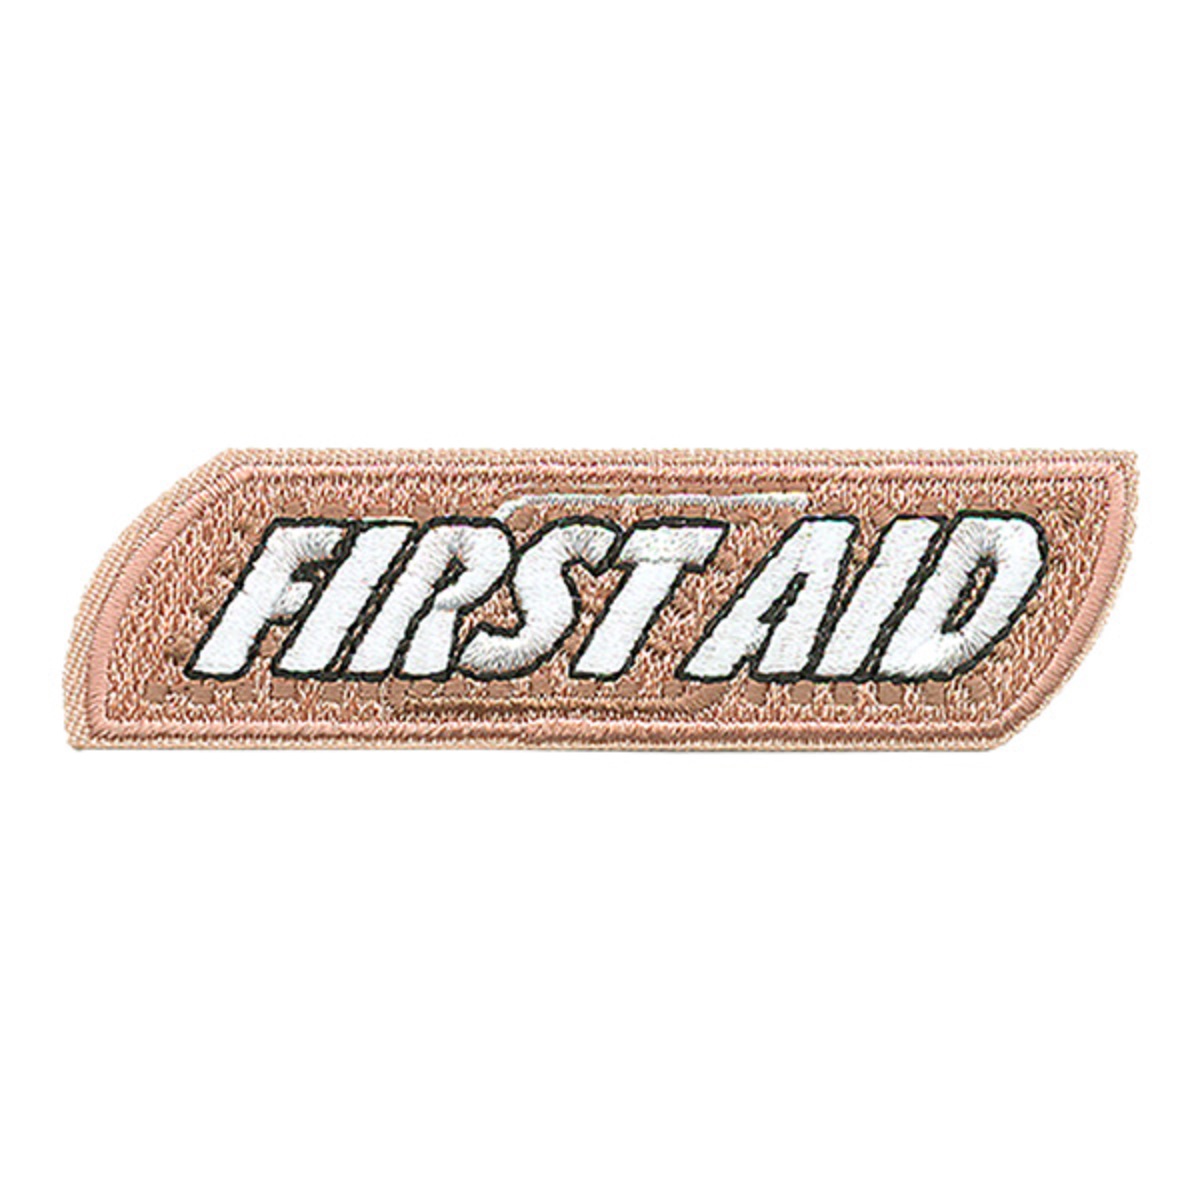 Girl Scouts of Greater Chicago and Northwest Indiana  First Aid-Band Aid  Patch – Girl Scouts of Greater Chicago and Northwest Indiana